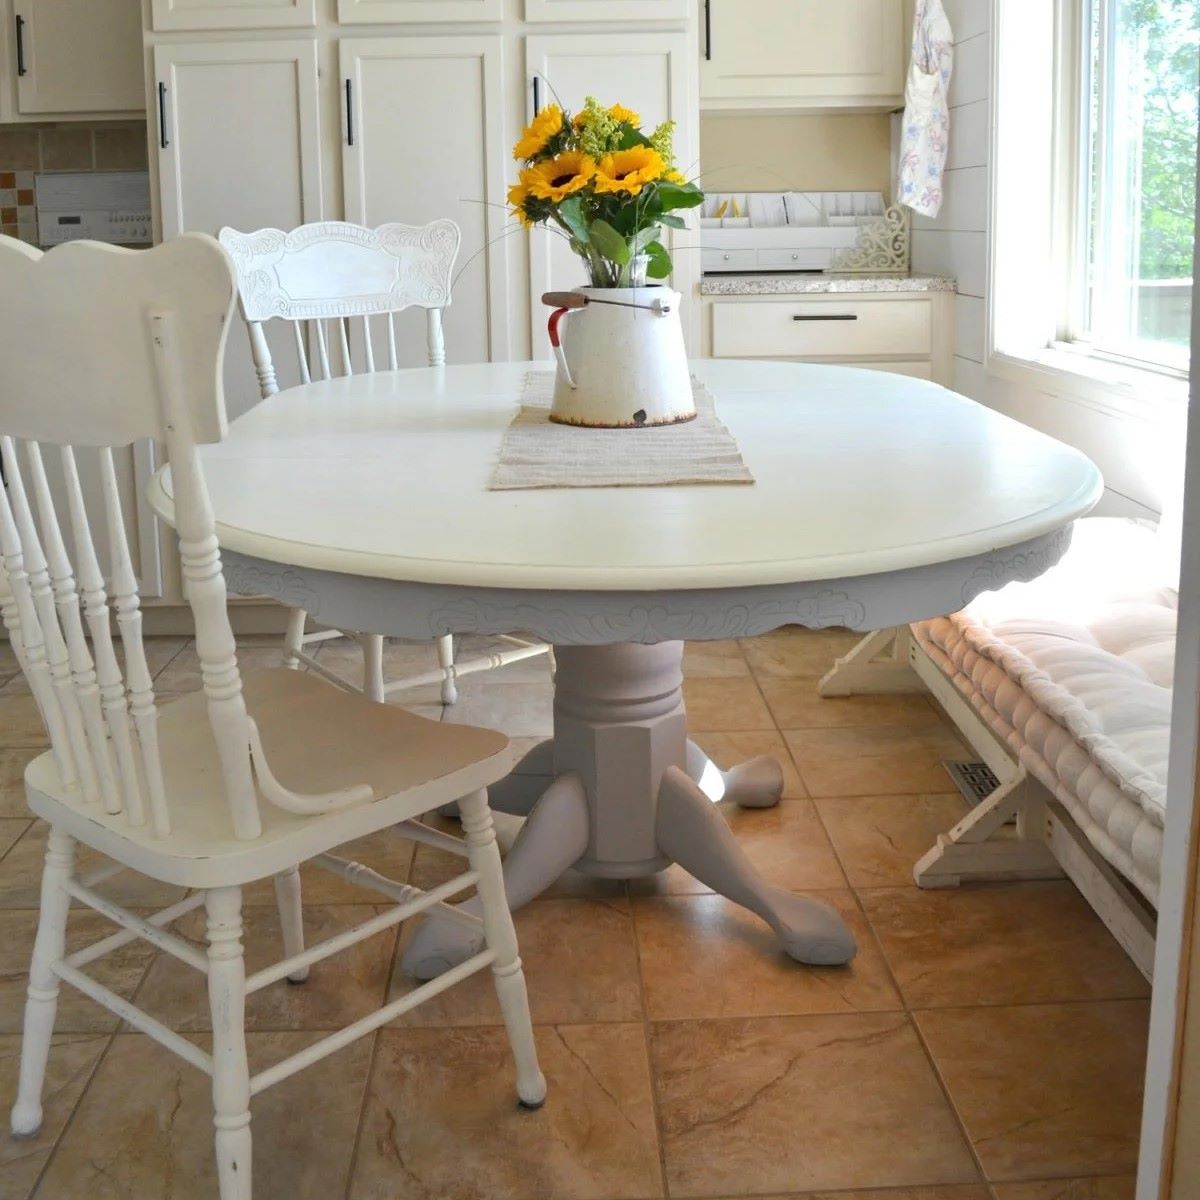 How To Chalk Paint A Dining Room Table